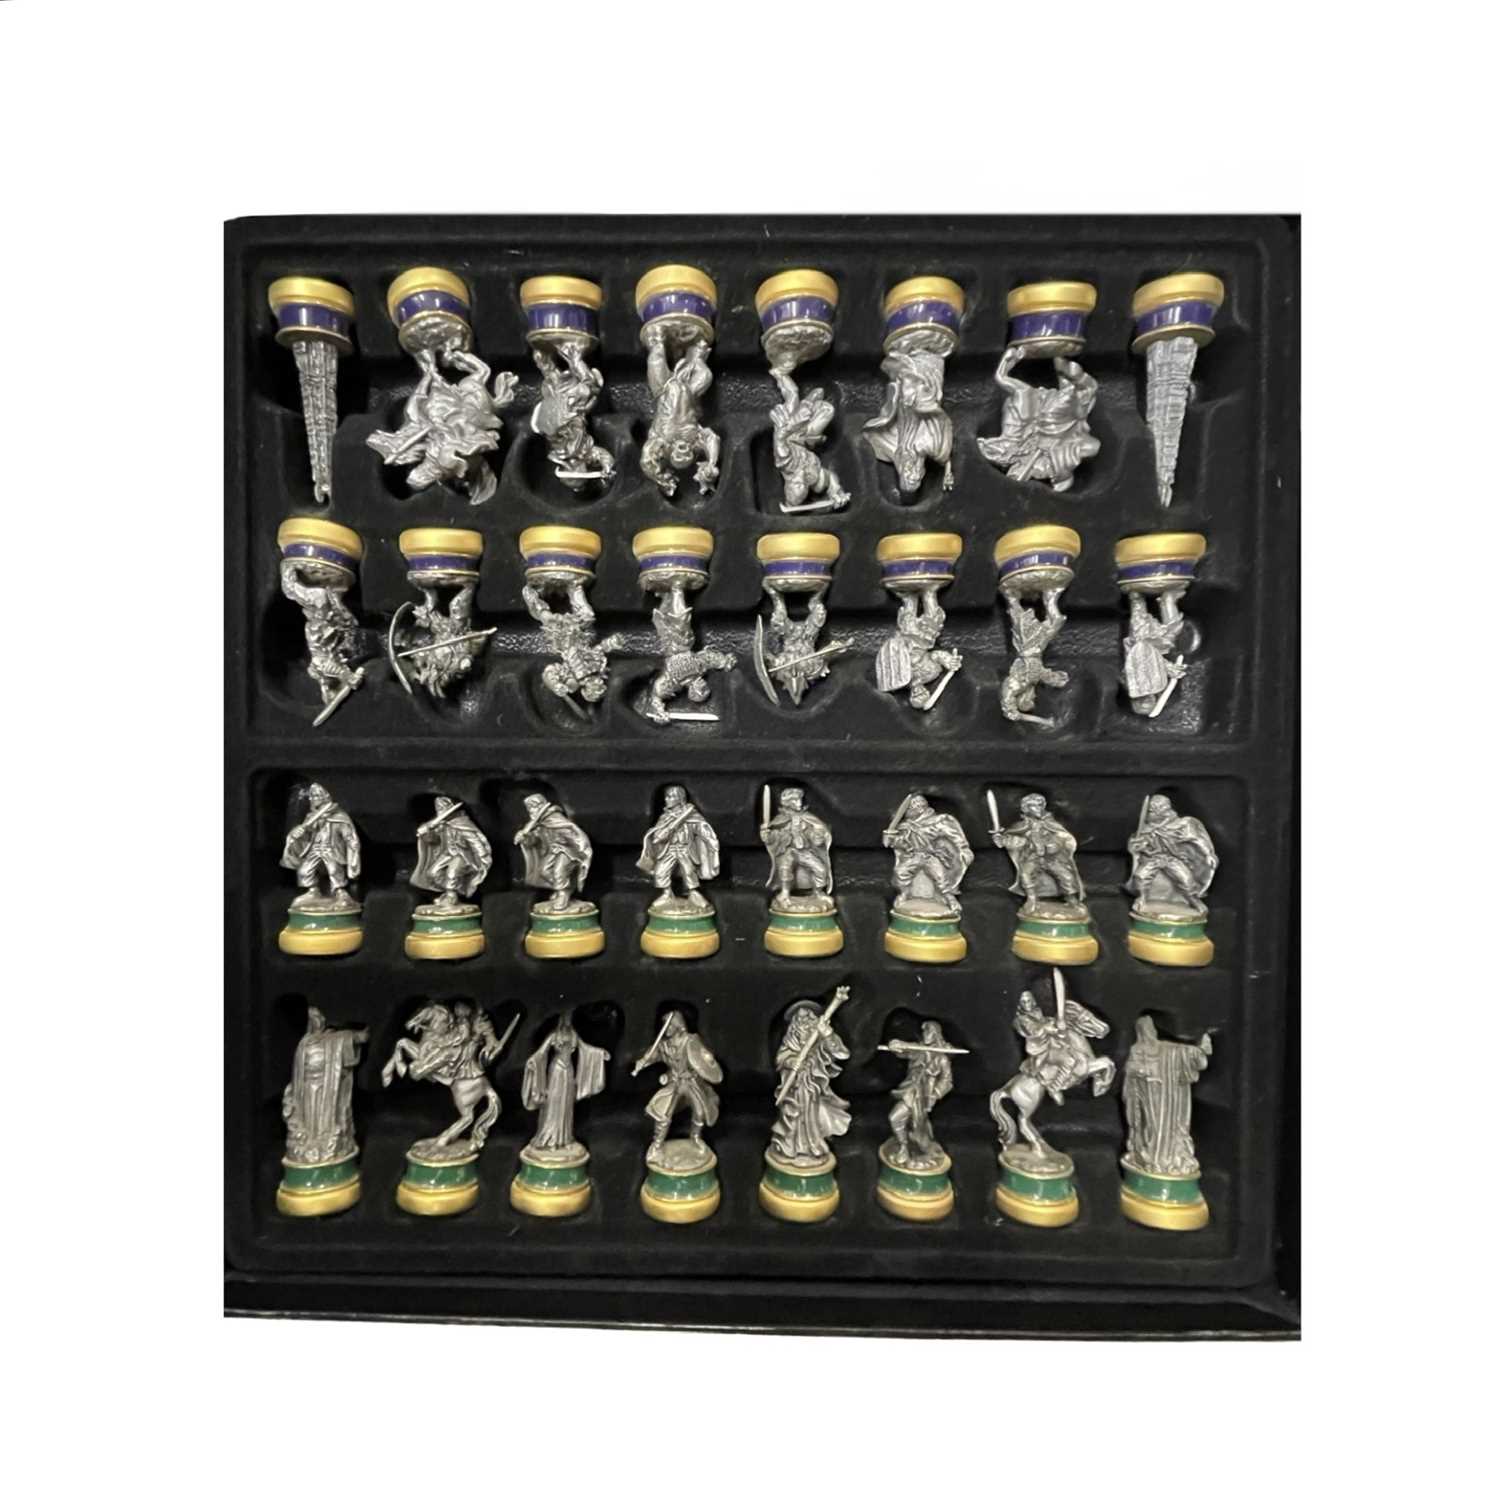 A Collector's Edition Lord of the Rings chess set by Noble, with highly detailed raised board and - Image 2 of 6